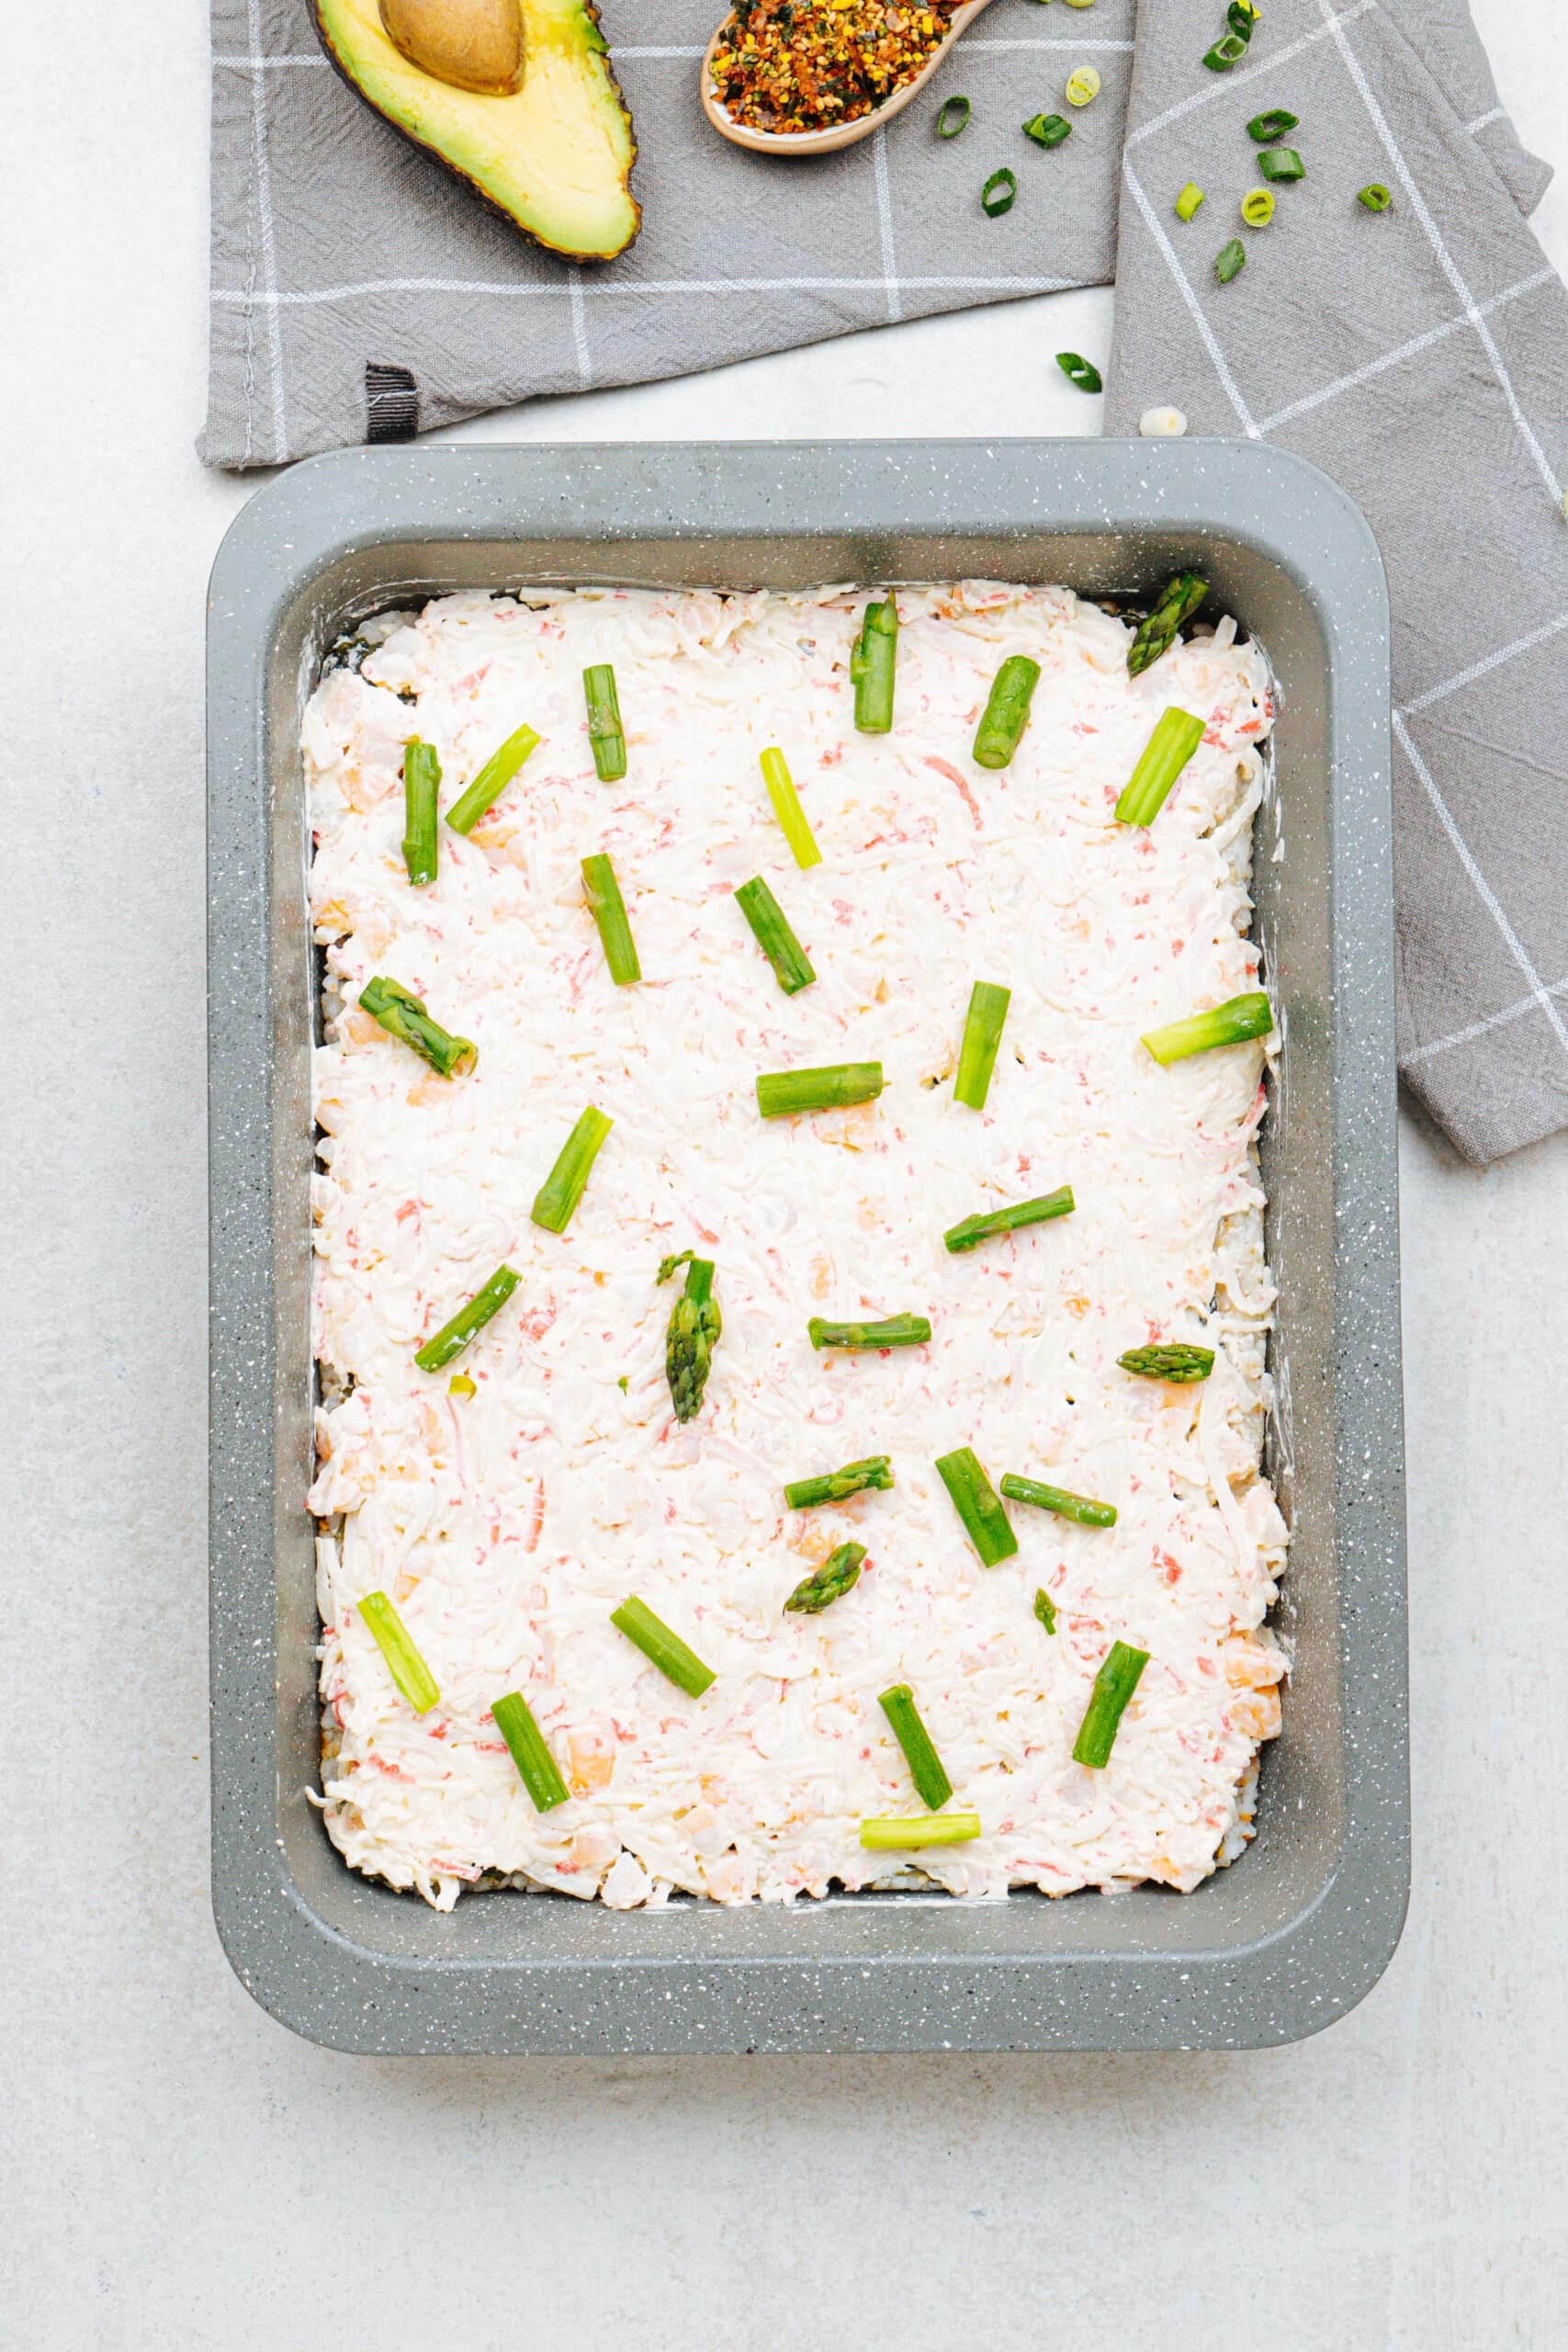 Pieces of asparagus on a sushi casserole